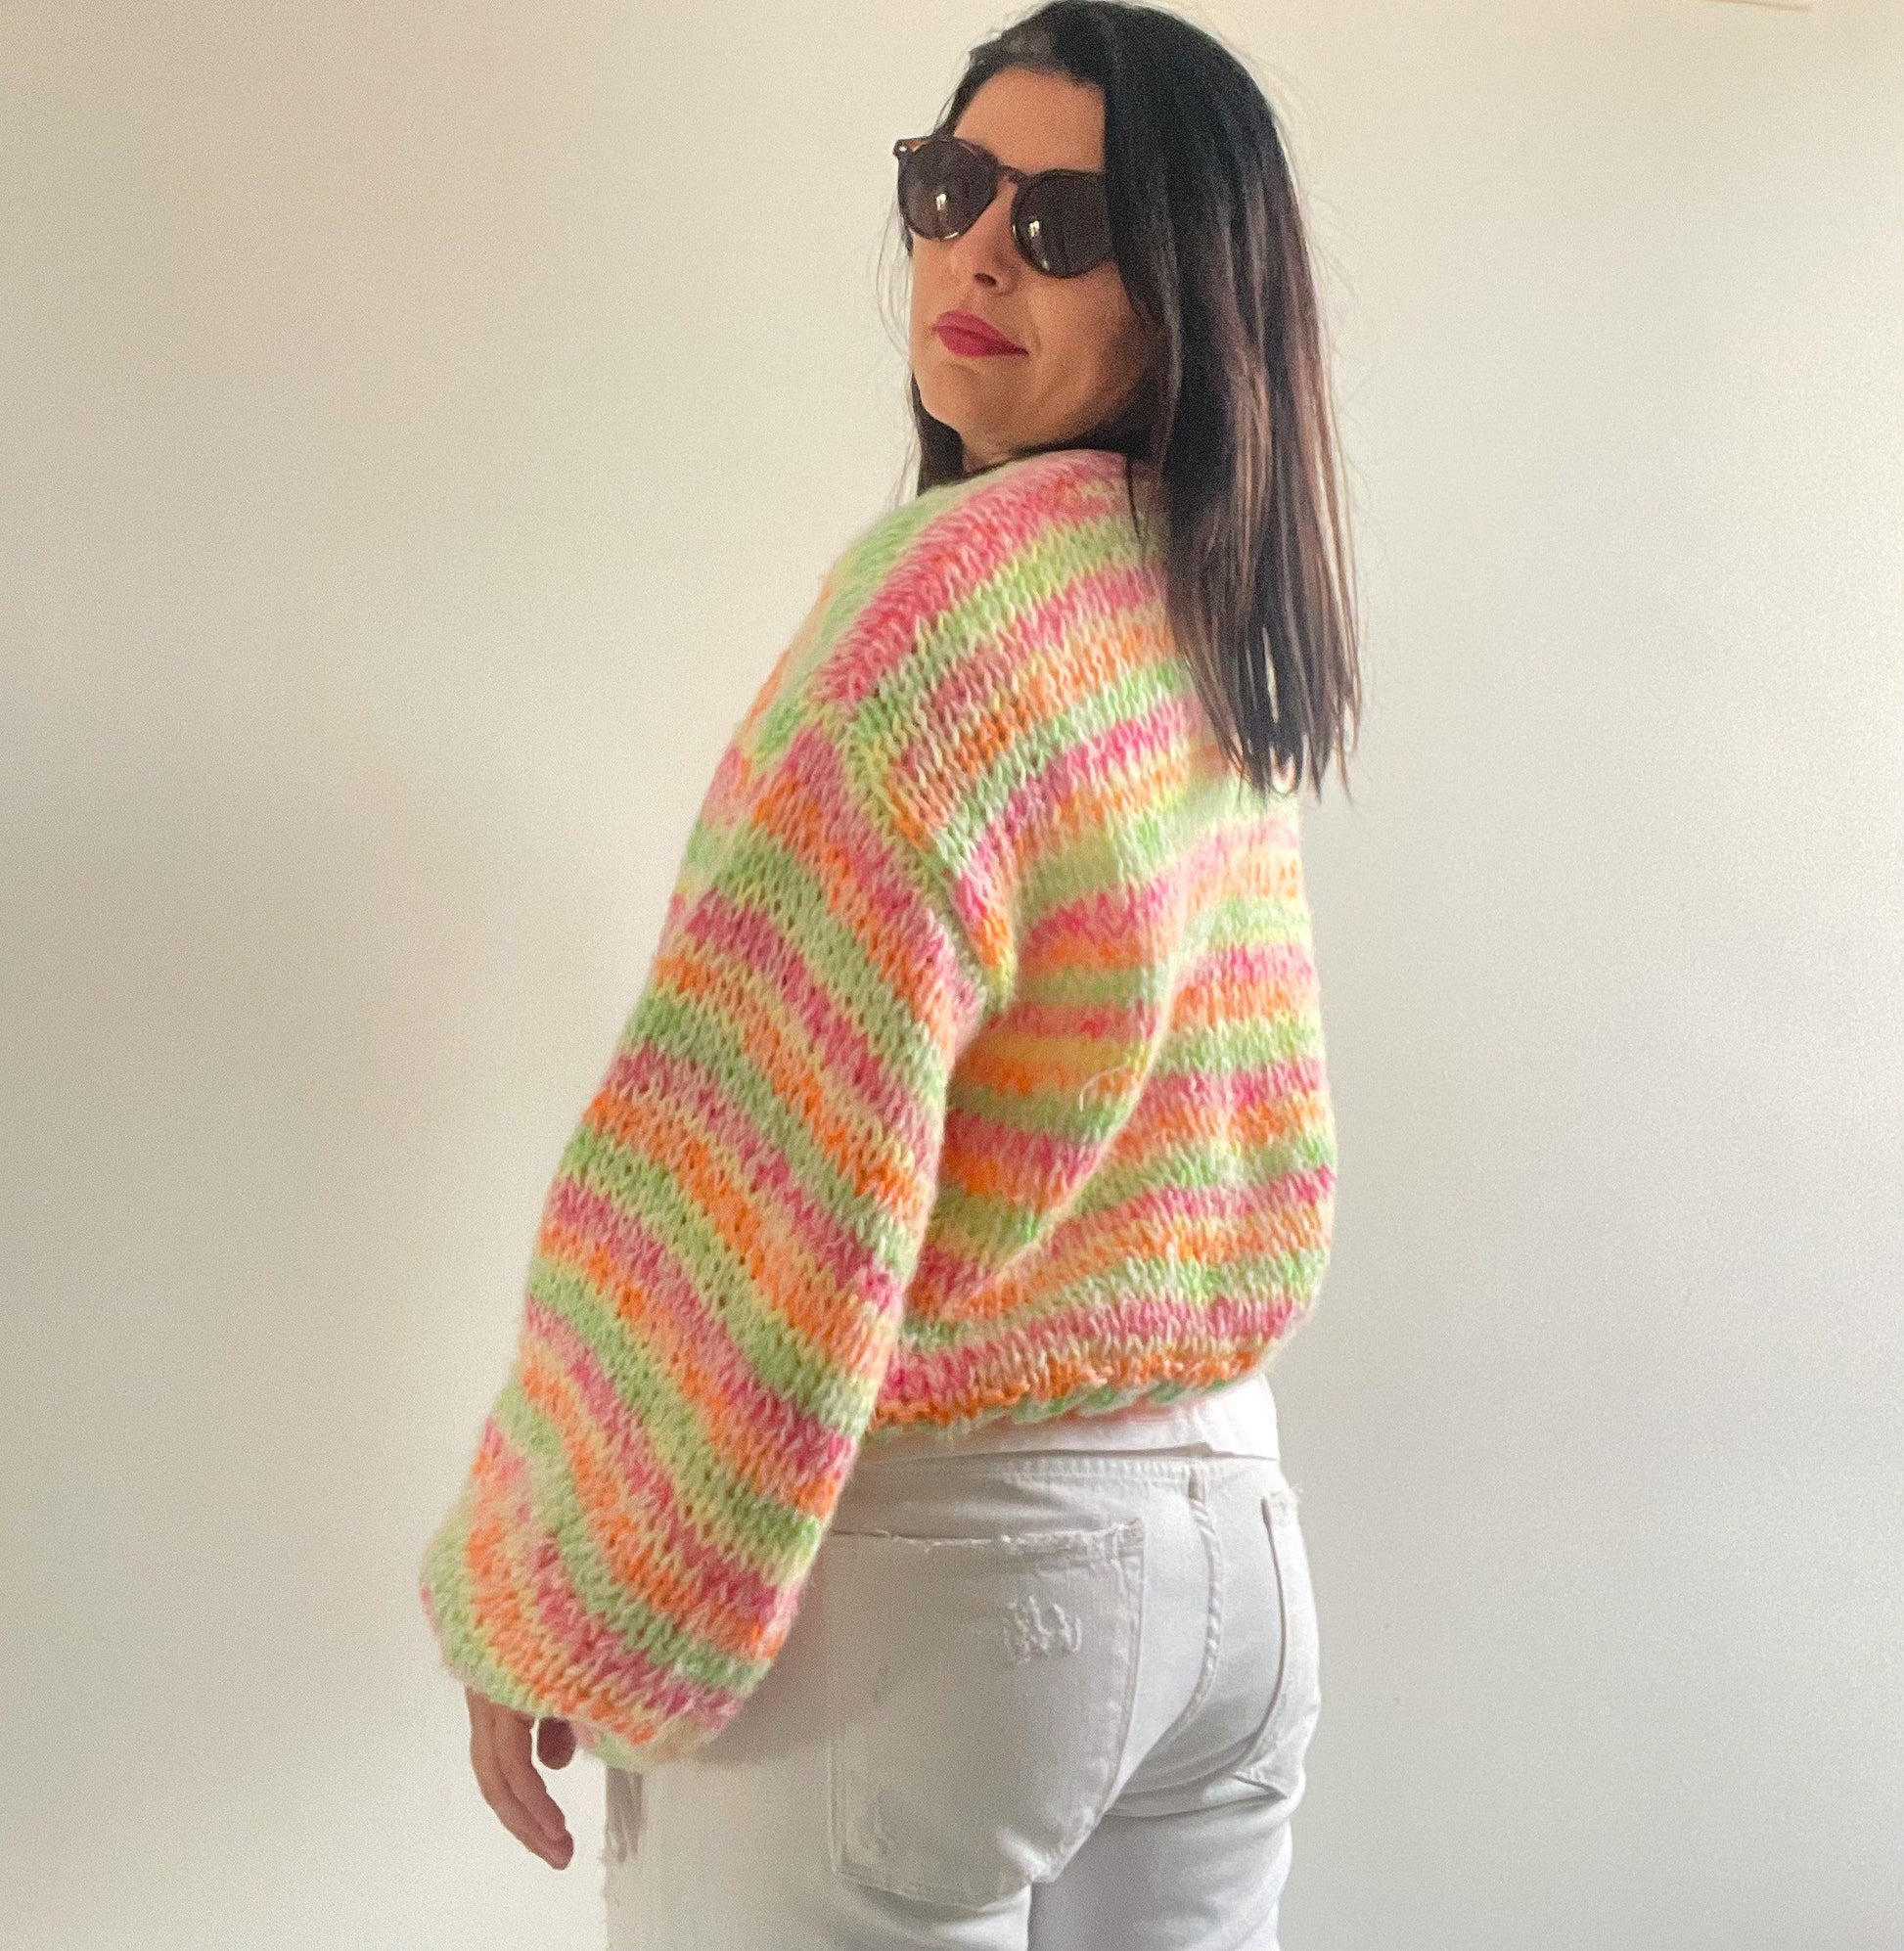 NOVA Cropped Cardigan, Knit Multicolor Cardigan, Short Colorful Sweater, Neon Colors, Airy Cropped Cardigan, Soft Short Cardigan